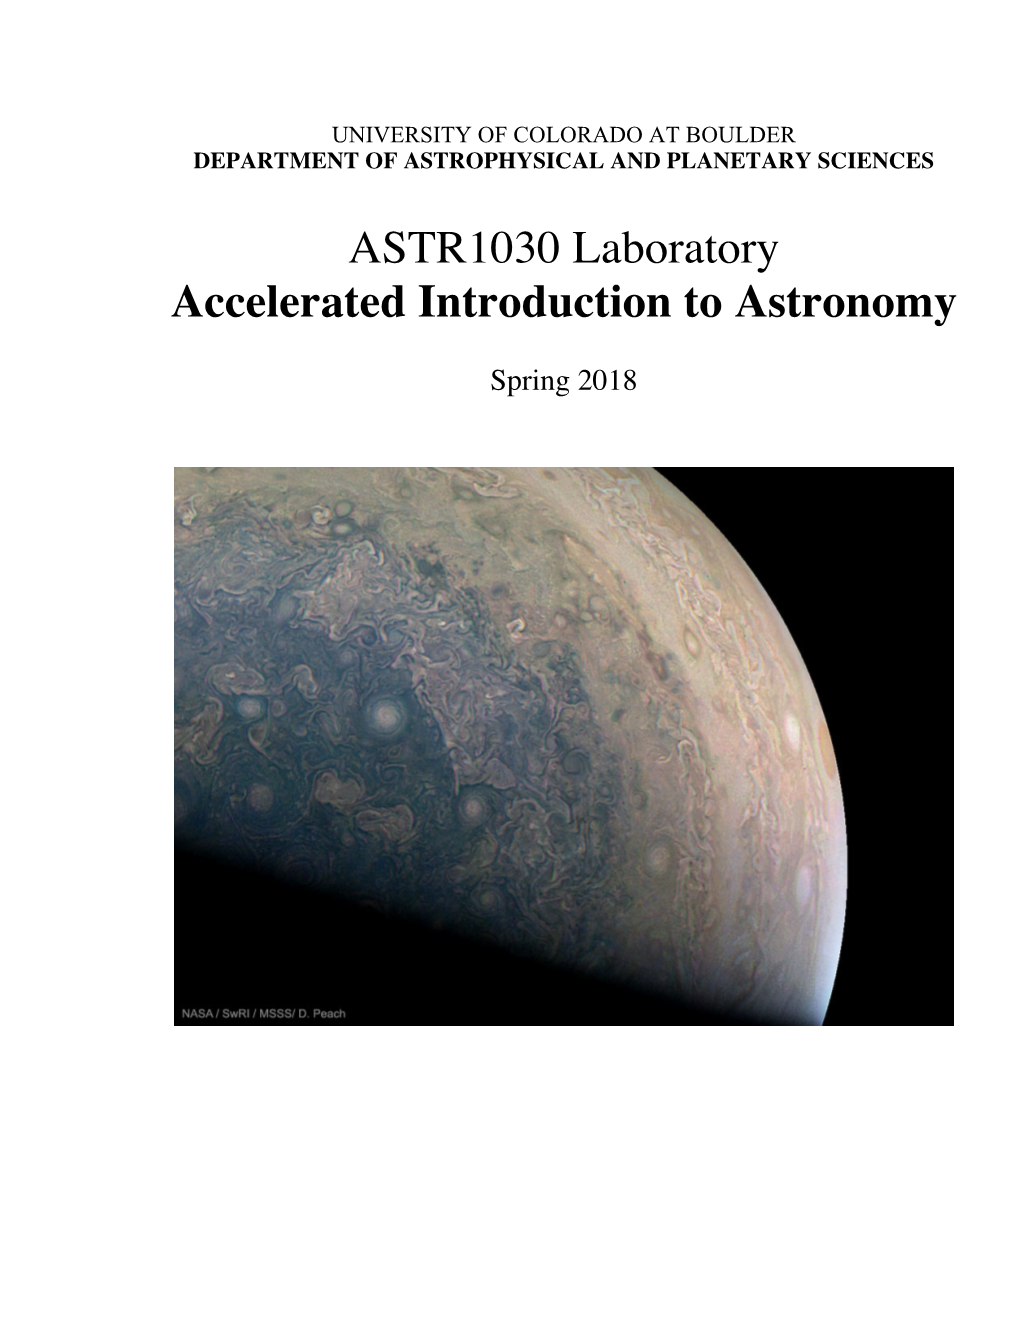 ASTR1030 Laboratory Accelerated Introduction to Astronomy